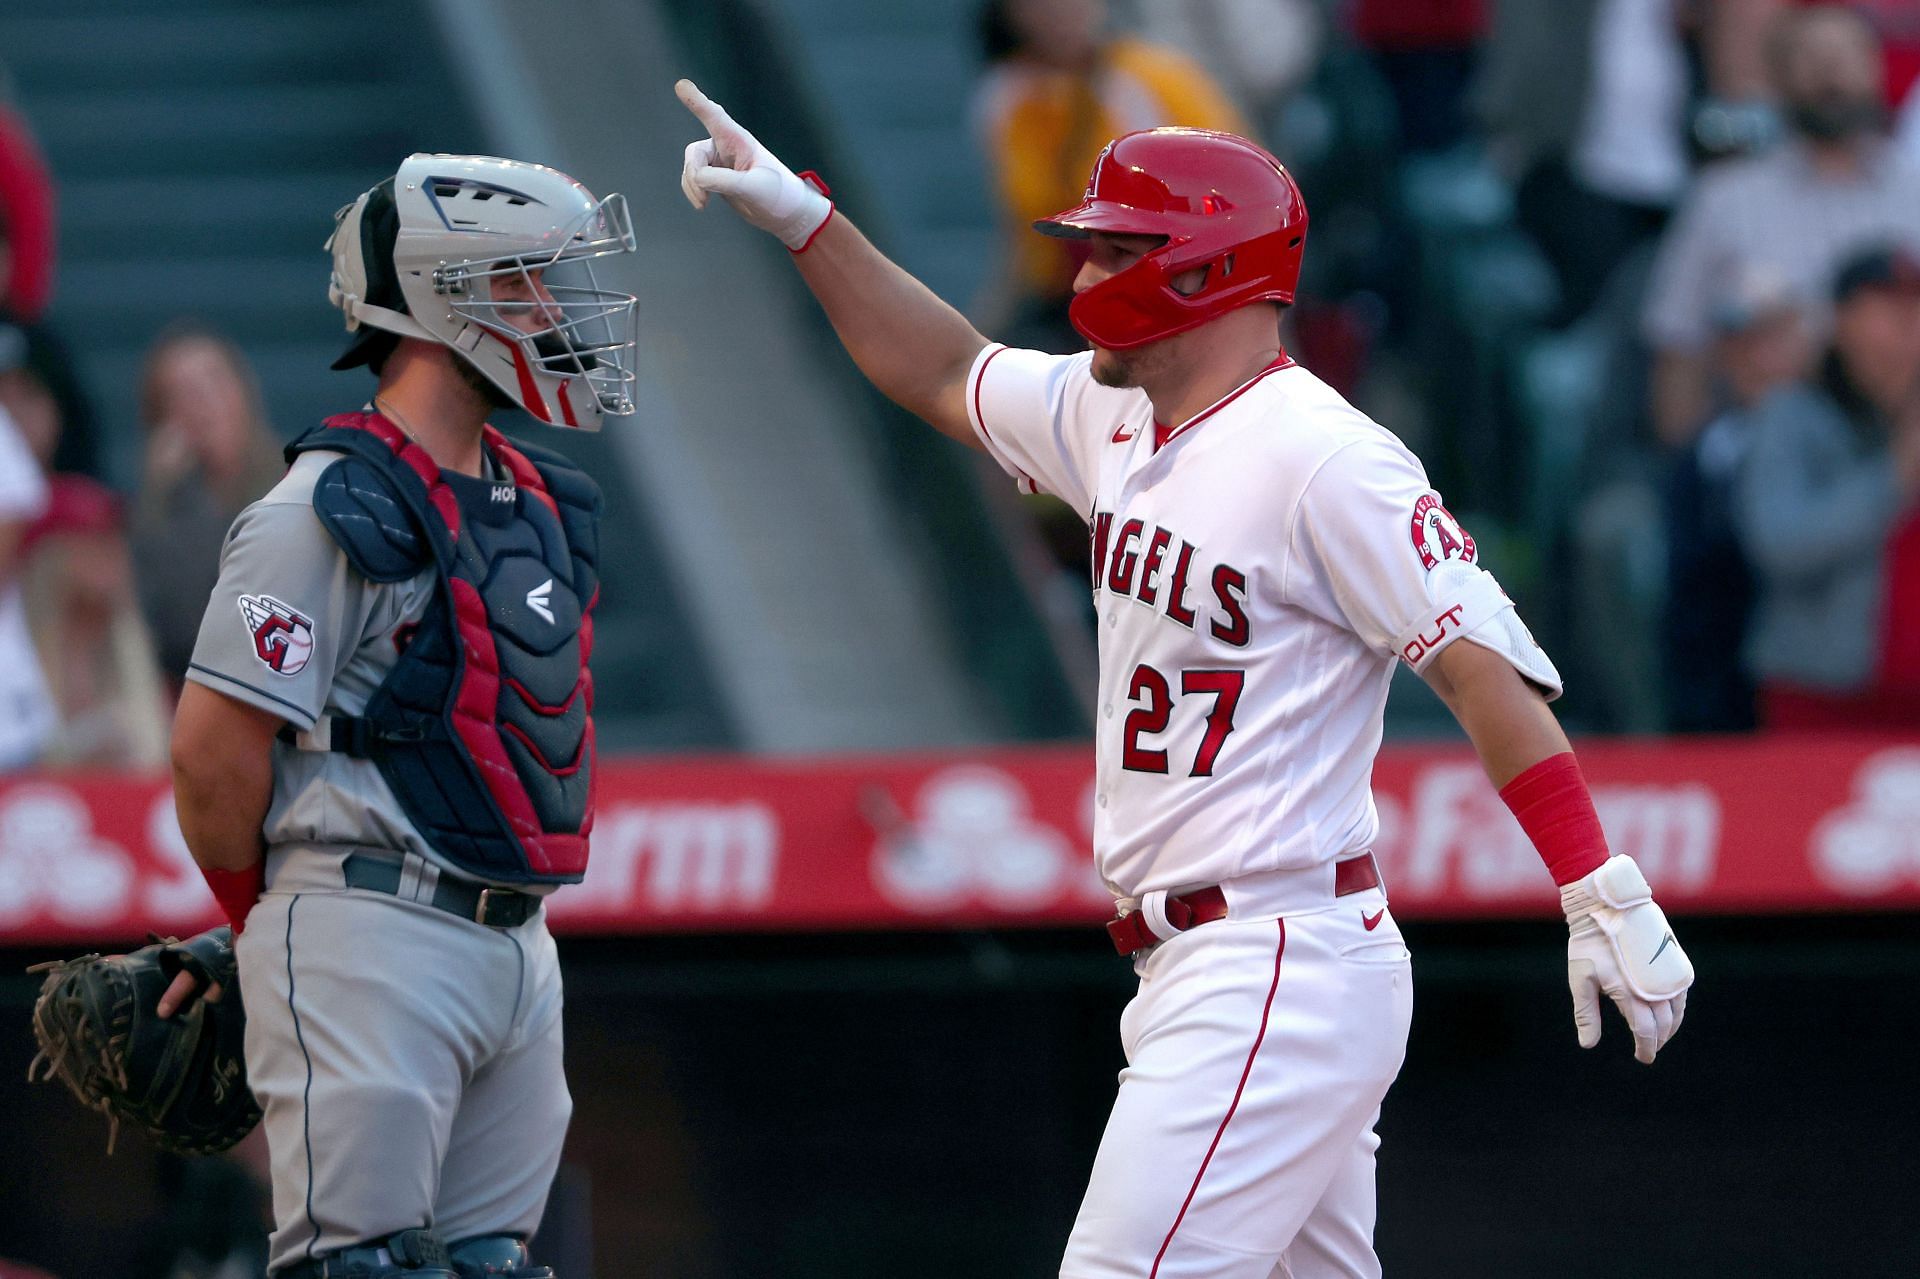 Mike Trout was the youngest player the MLB has ever seen to steal 200 bases and hit as many home runs. He accomplished it before his 28th birthday